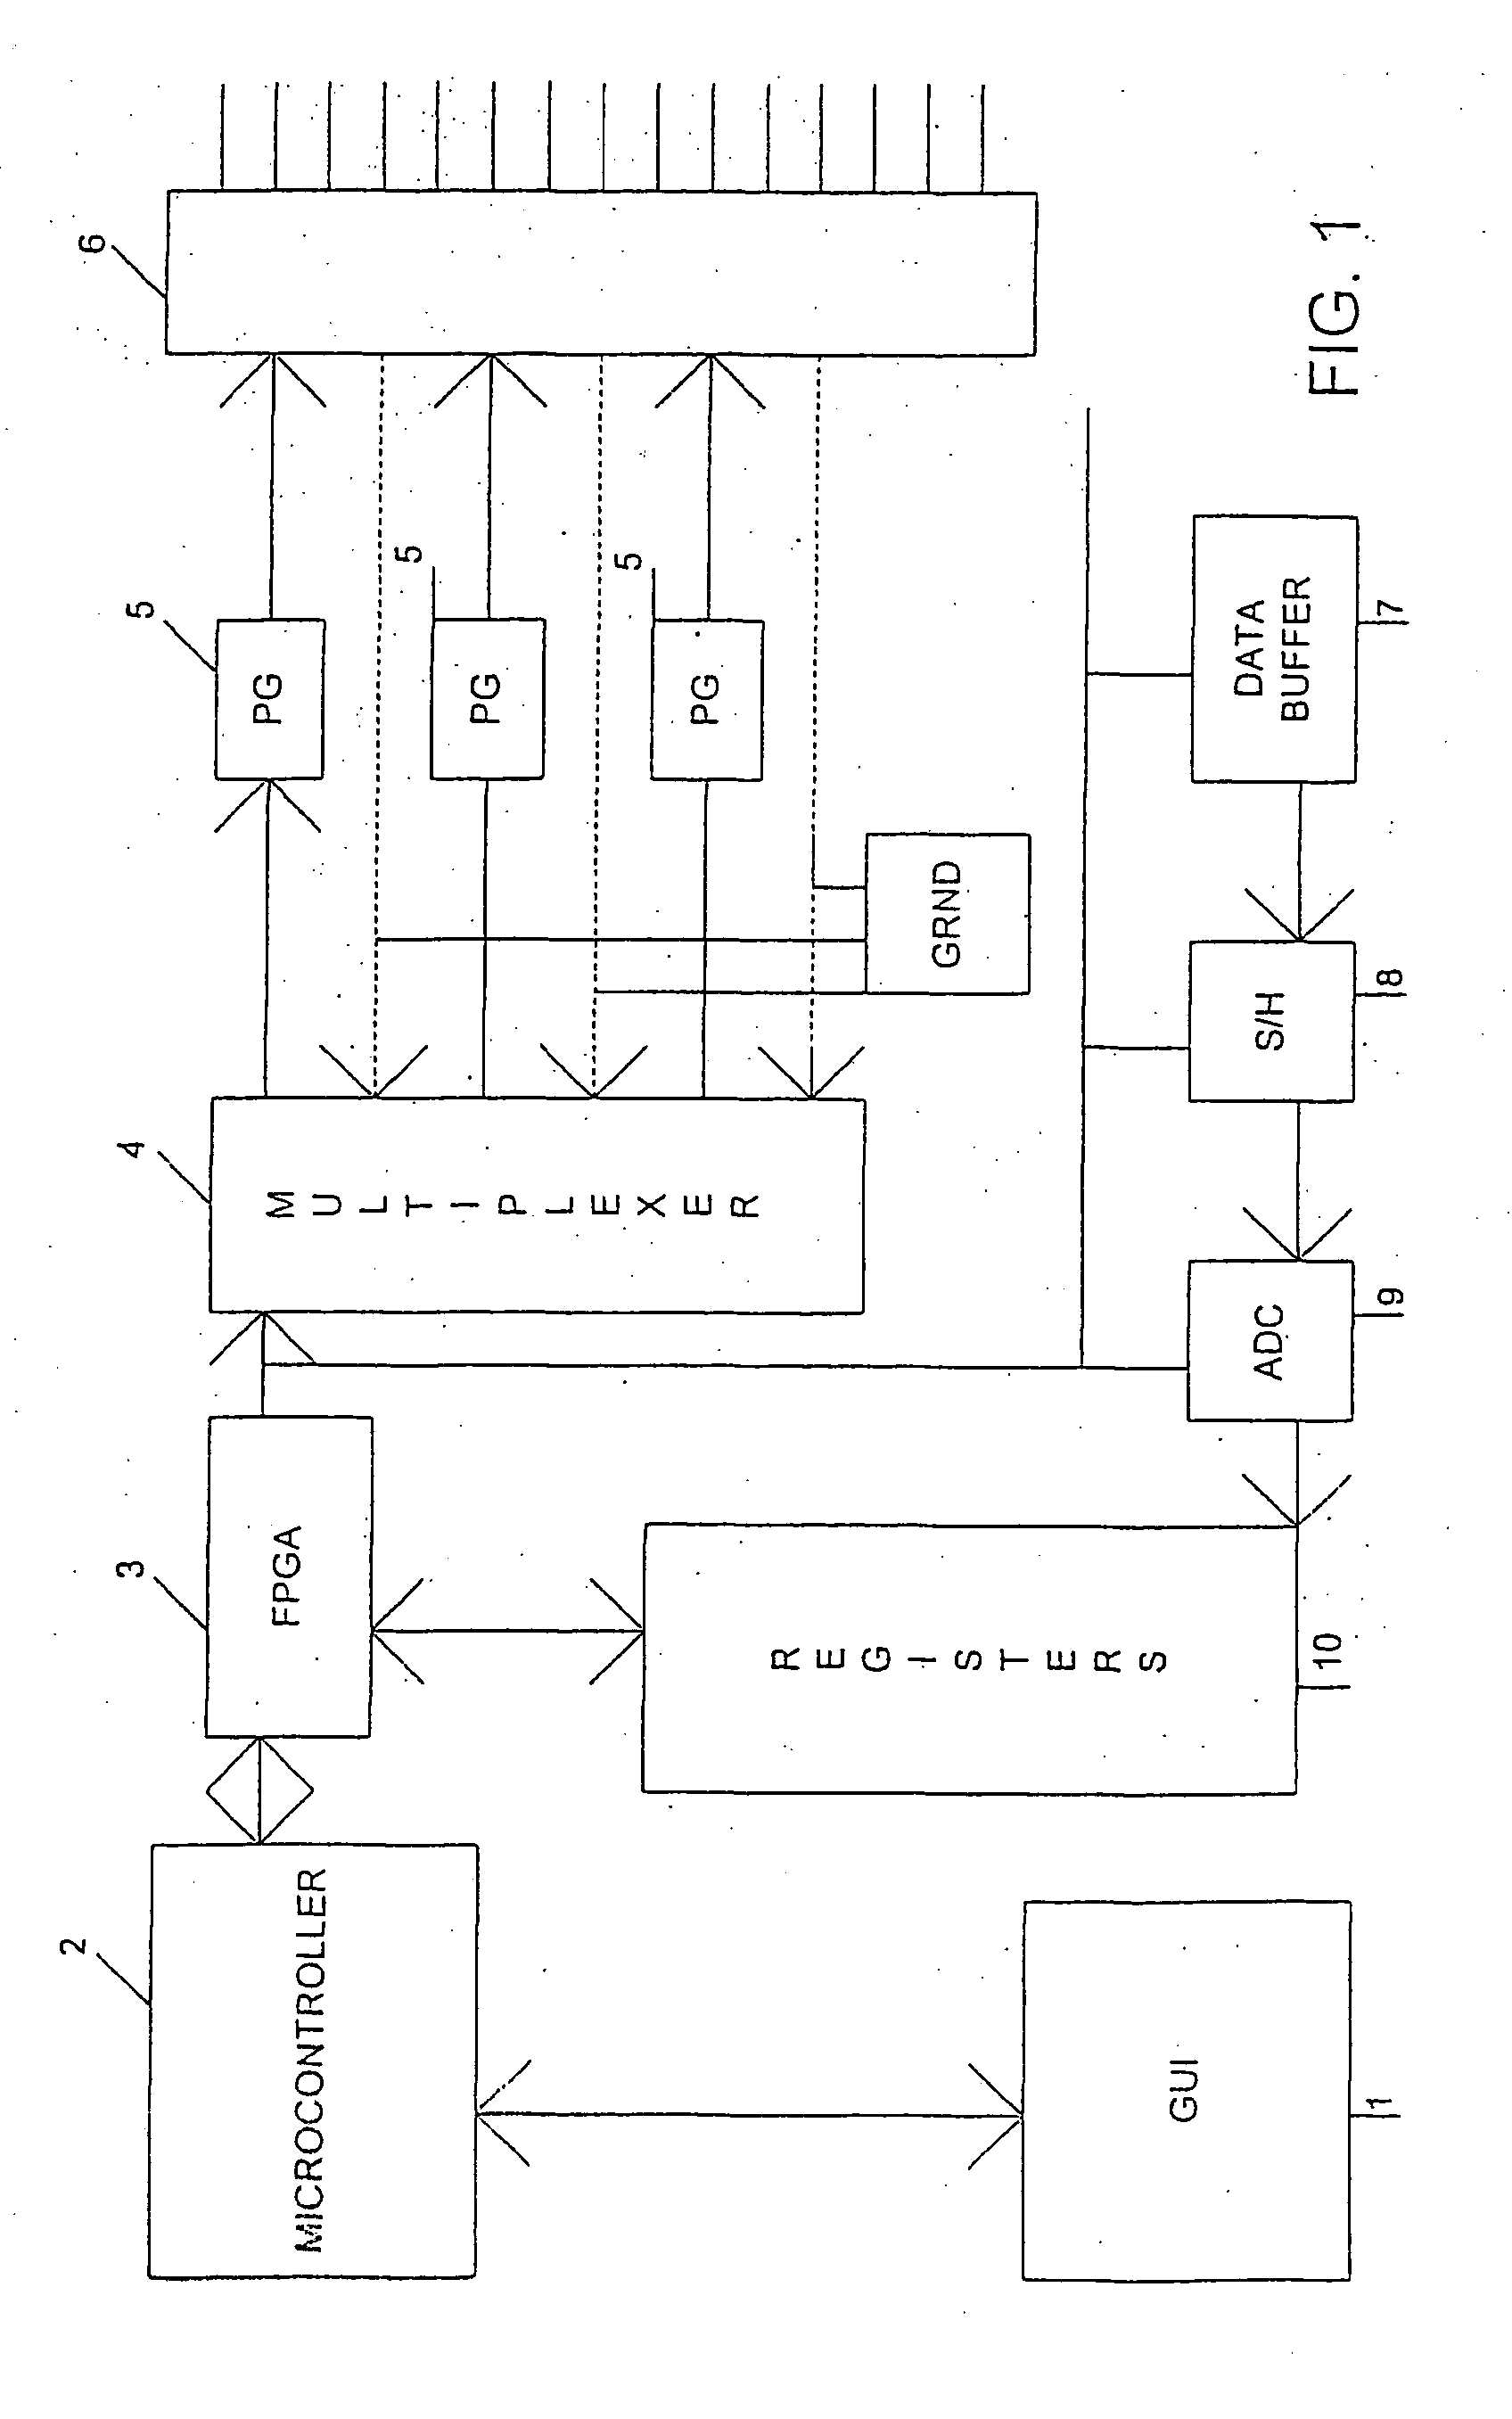 Fault detection system and method